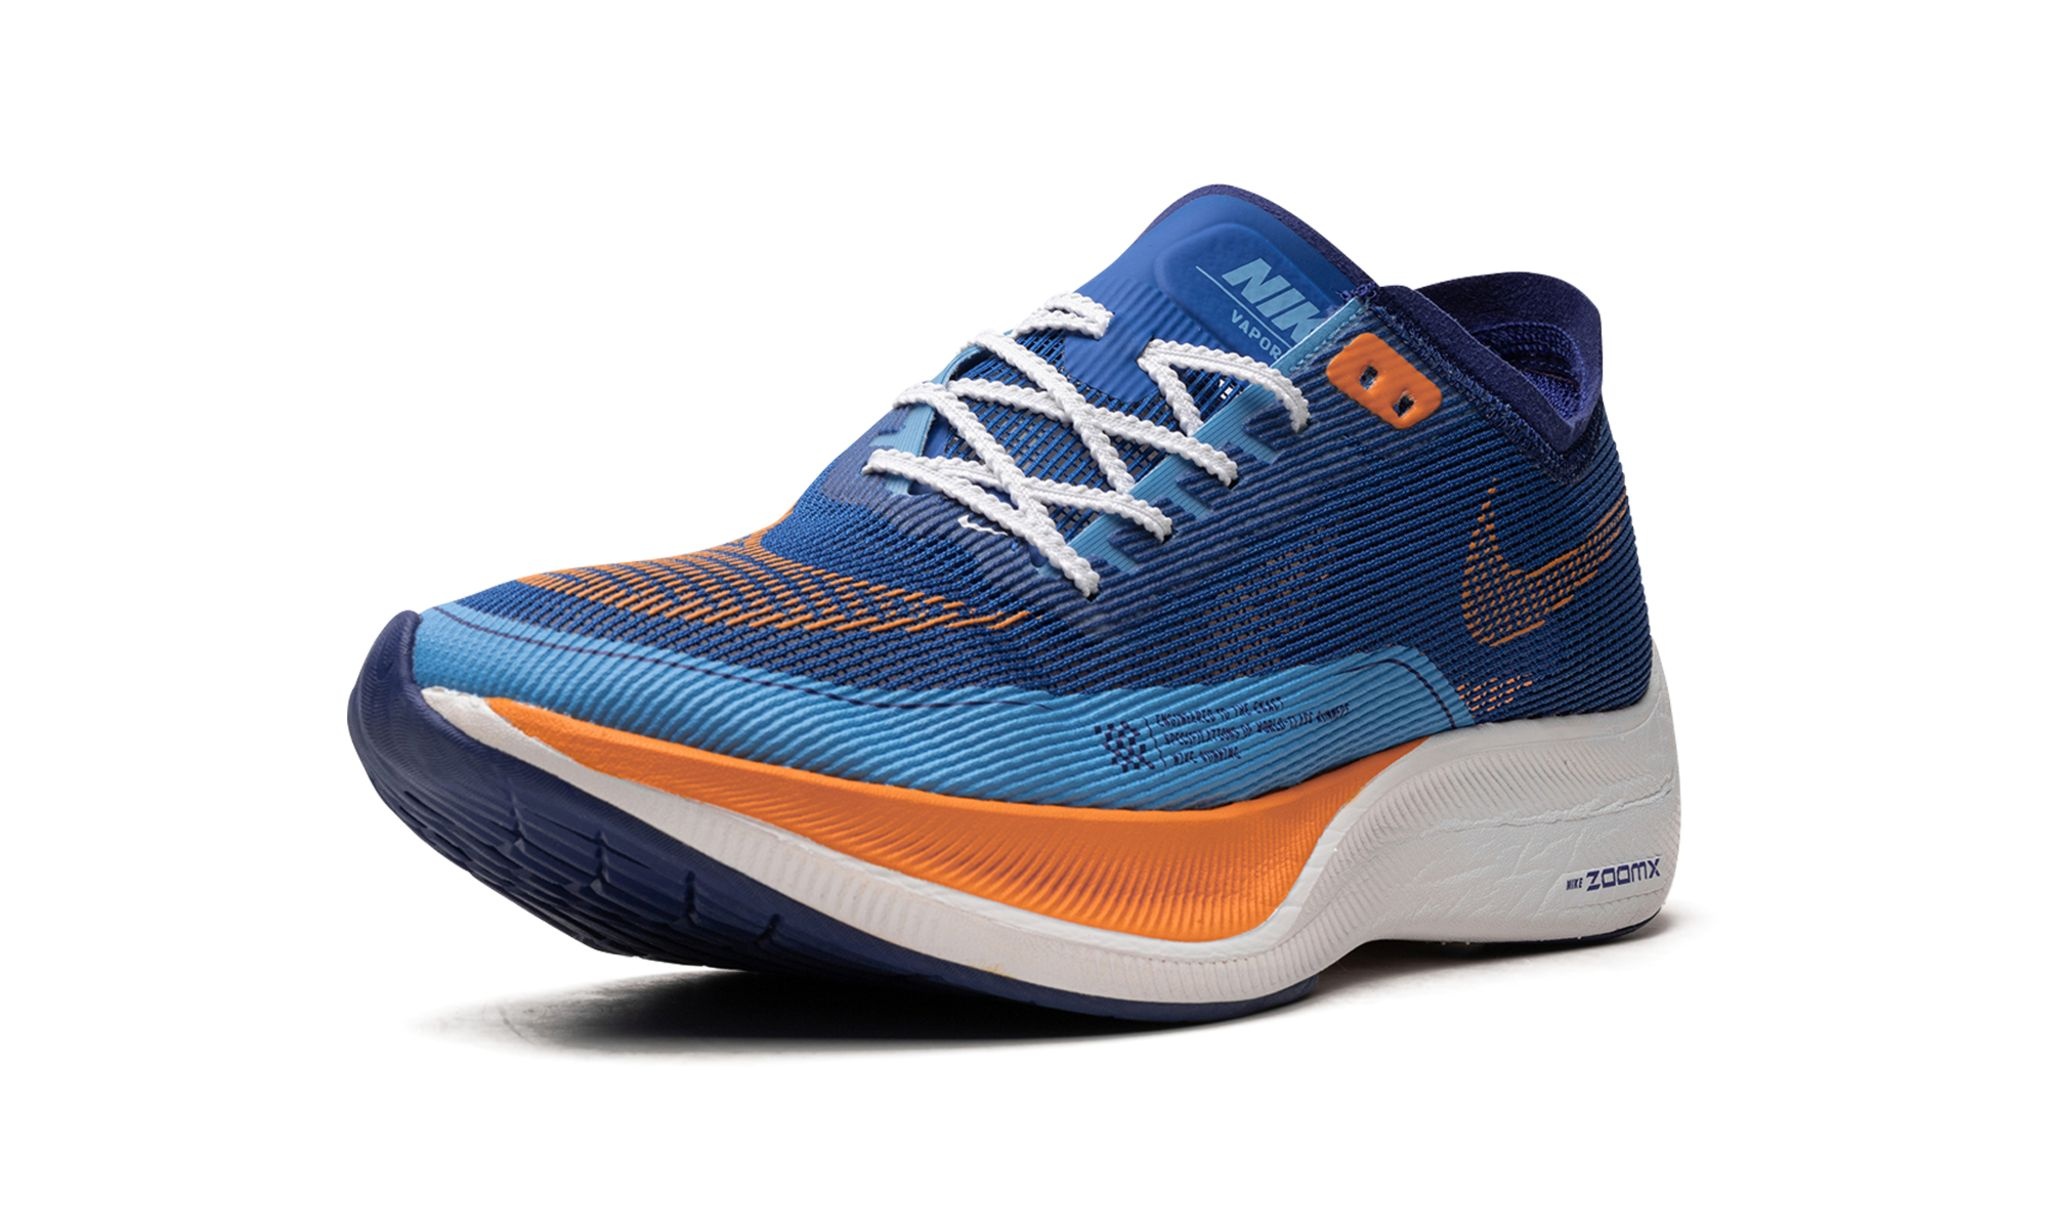 ZoomX Vaporfly Next% 2 "Game Royal" - 4